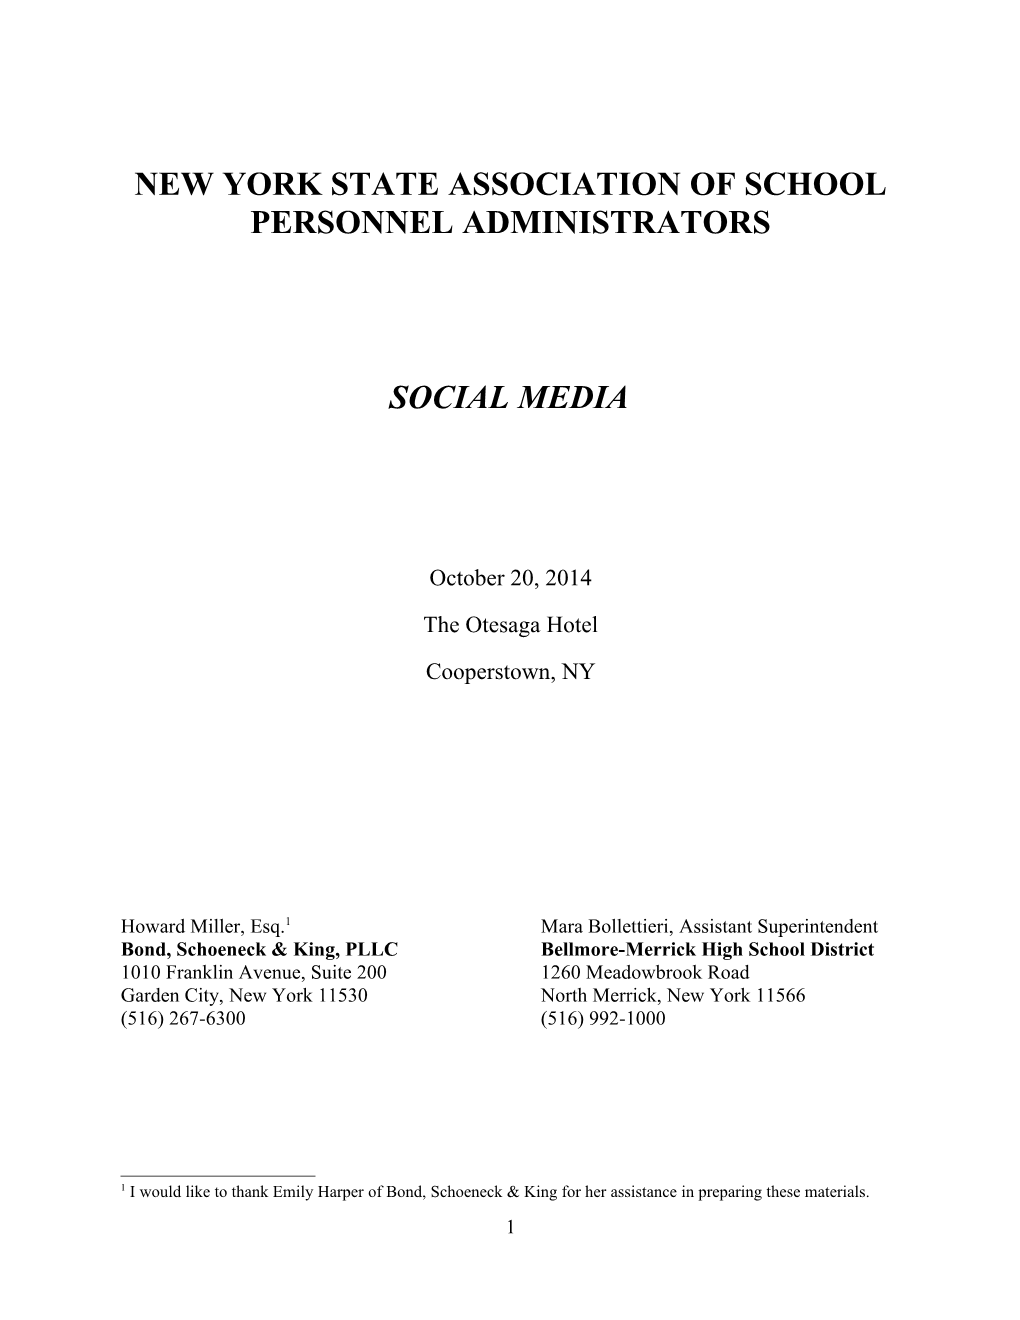 New York State Association of School Personnel Administrators